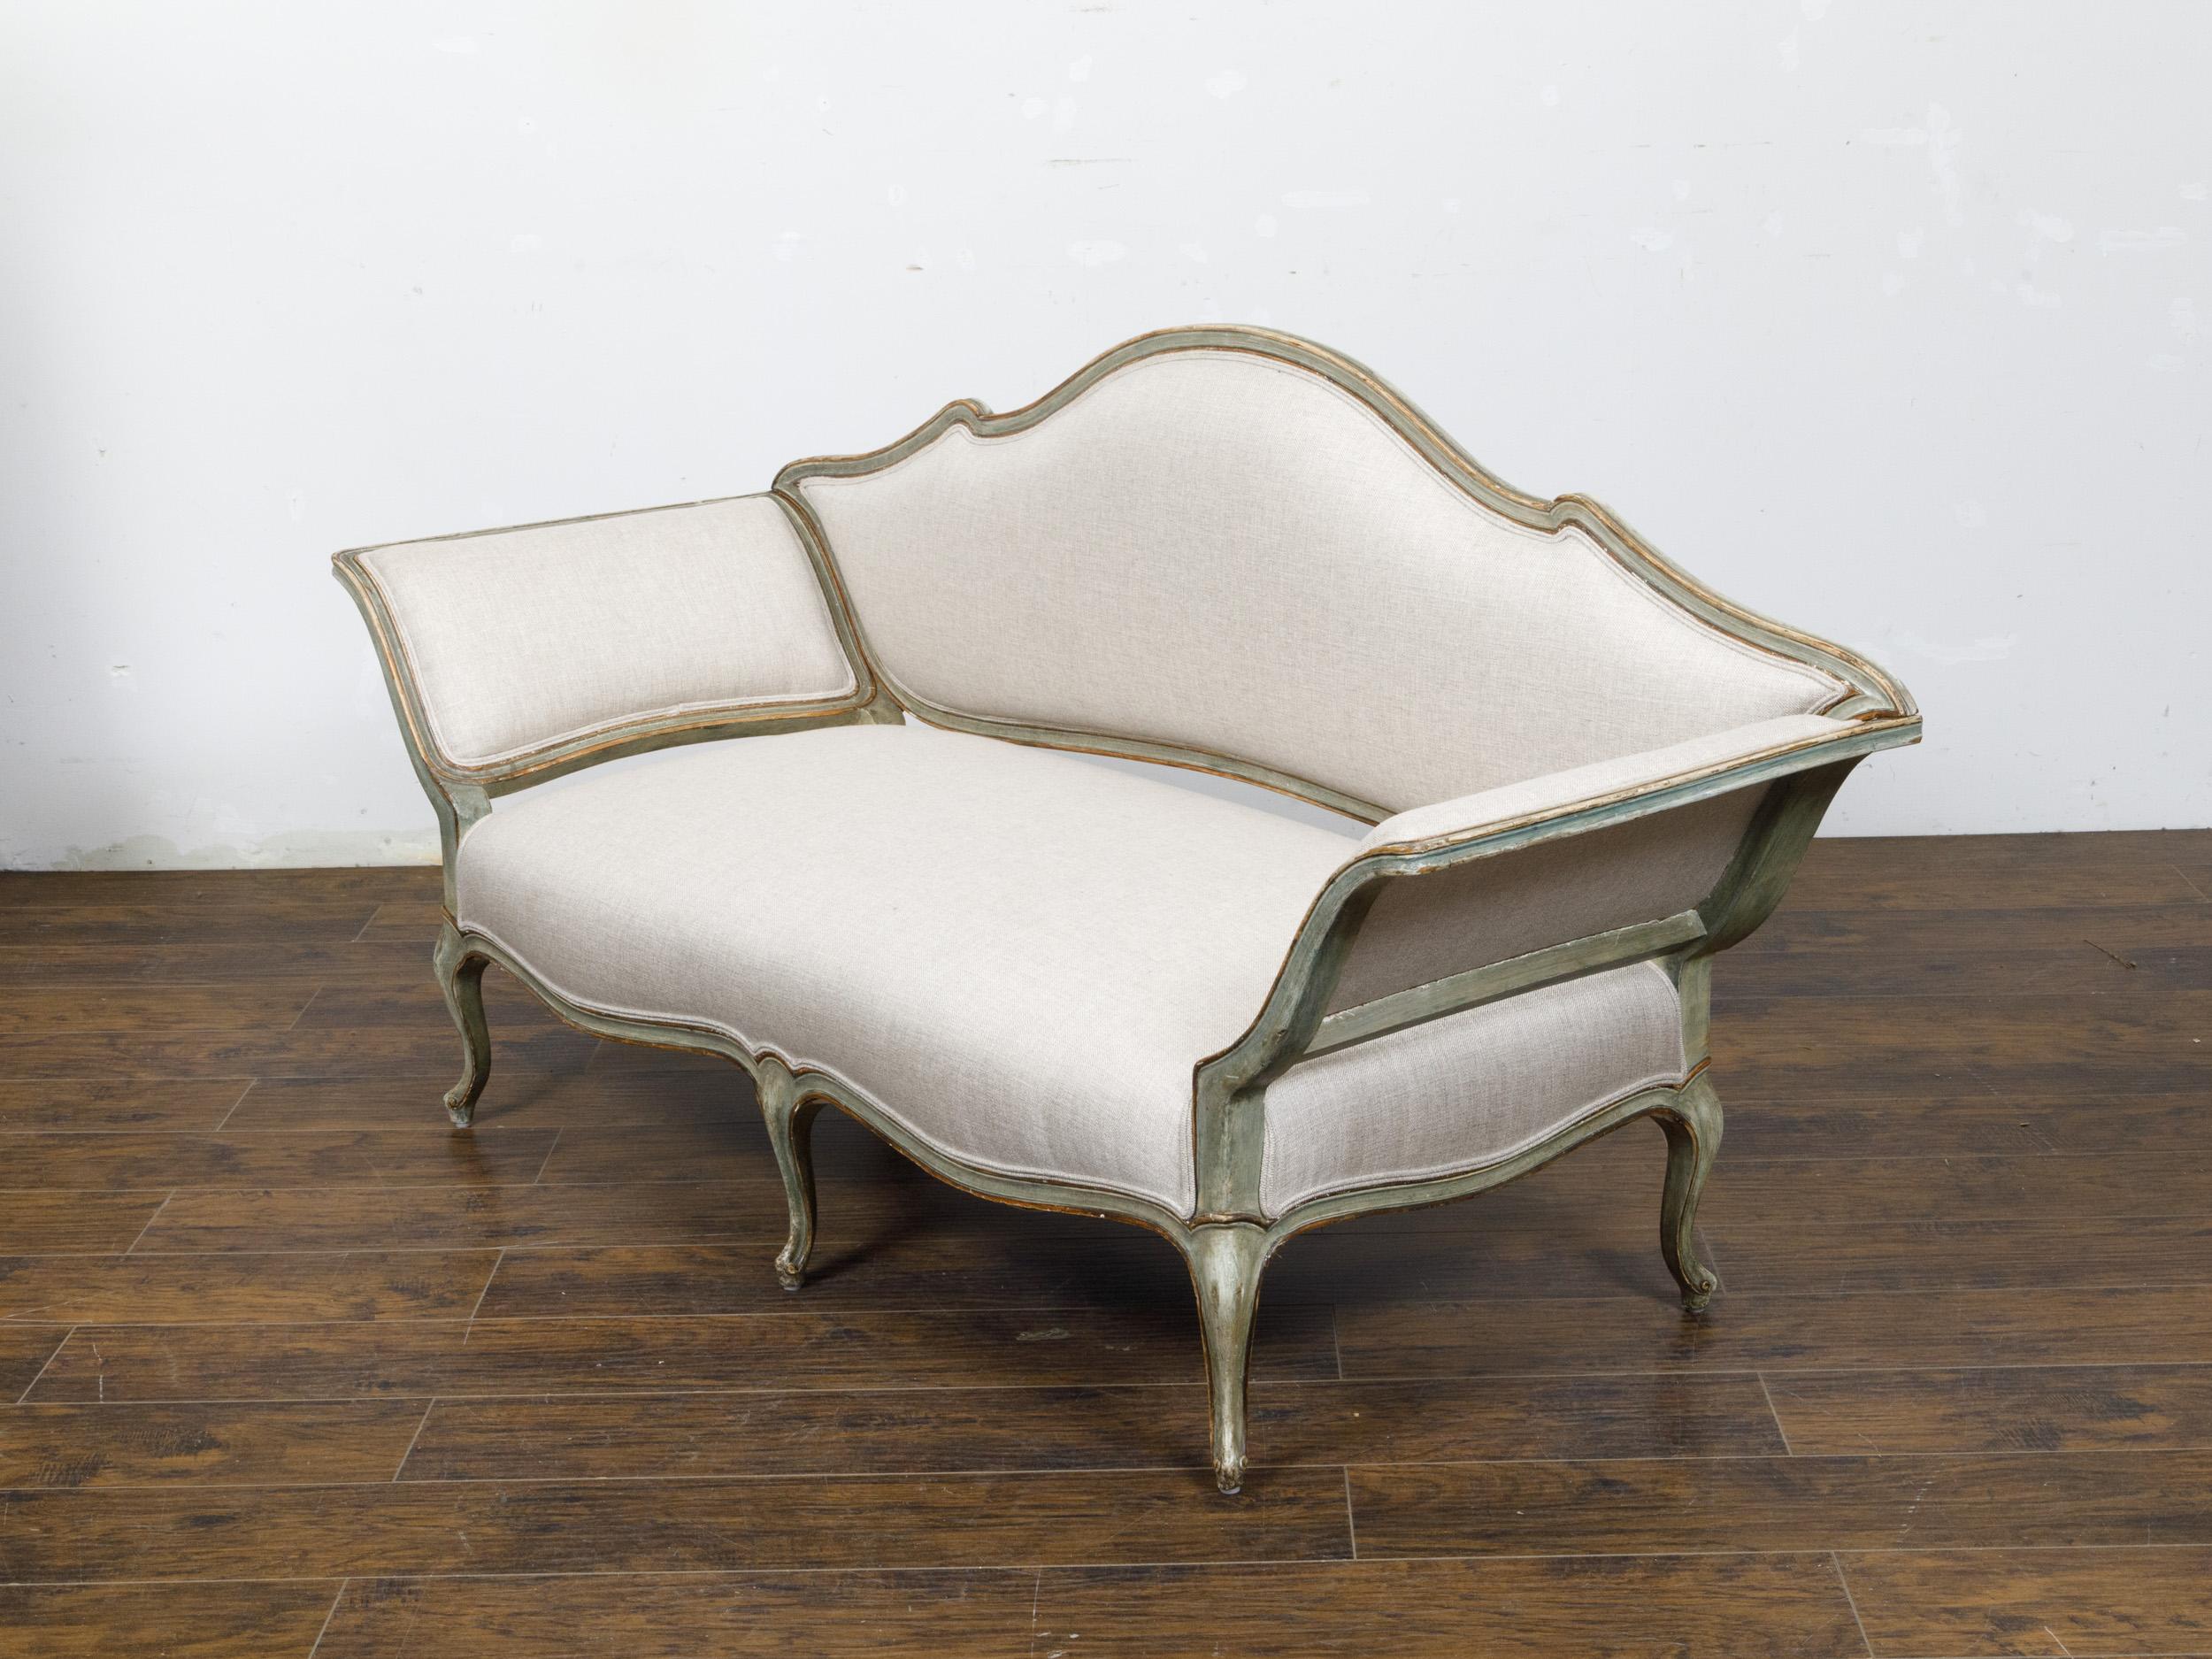 An Italian Rococo style settee from the 19th century with gray green painted finish, out-scrolling arms, shaped back and cabriole legs. This Italian Rococo style settee from the 19th century is a graceful blend of elegance and historical charm. It